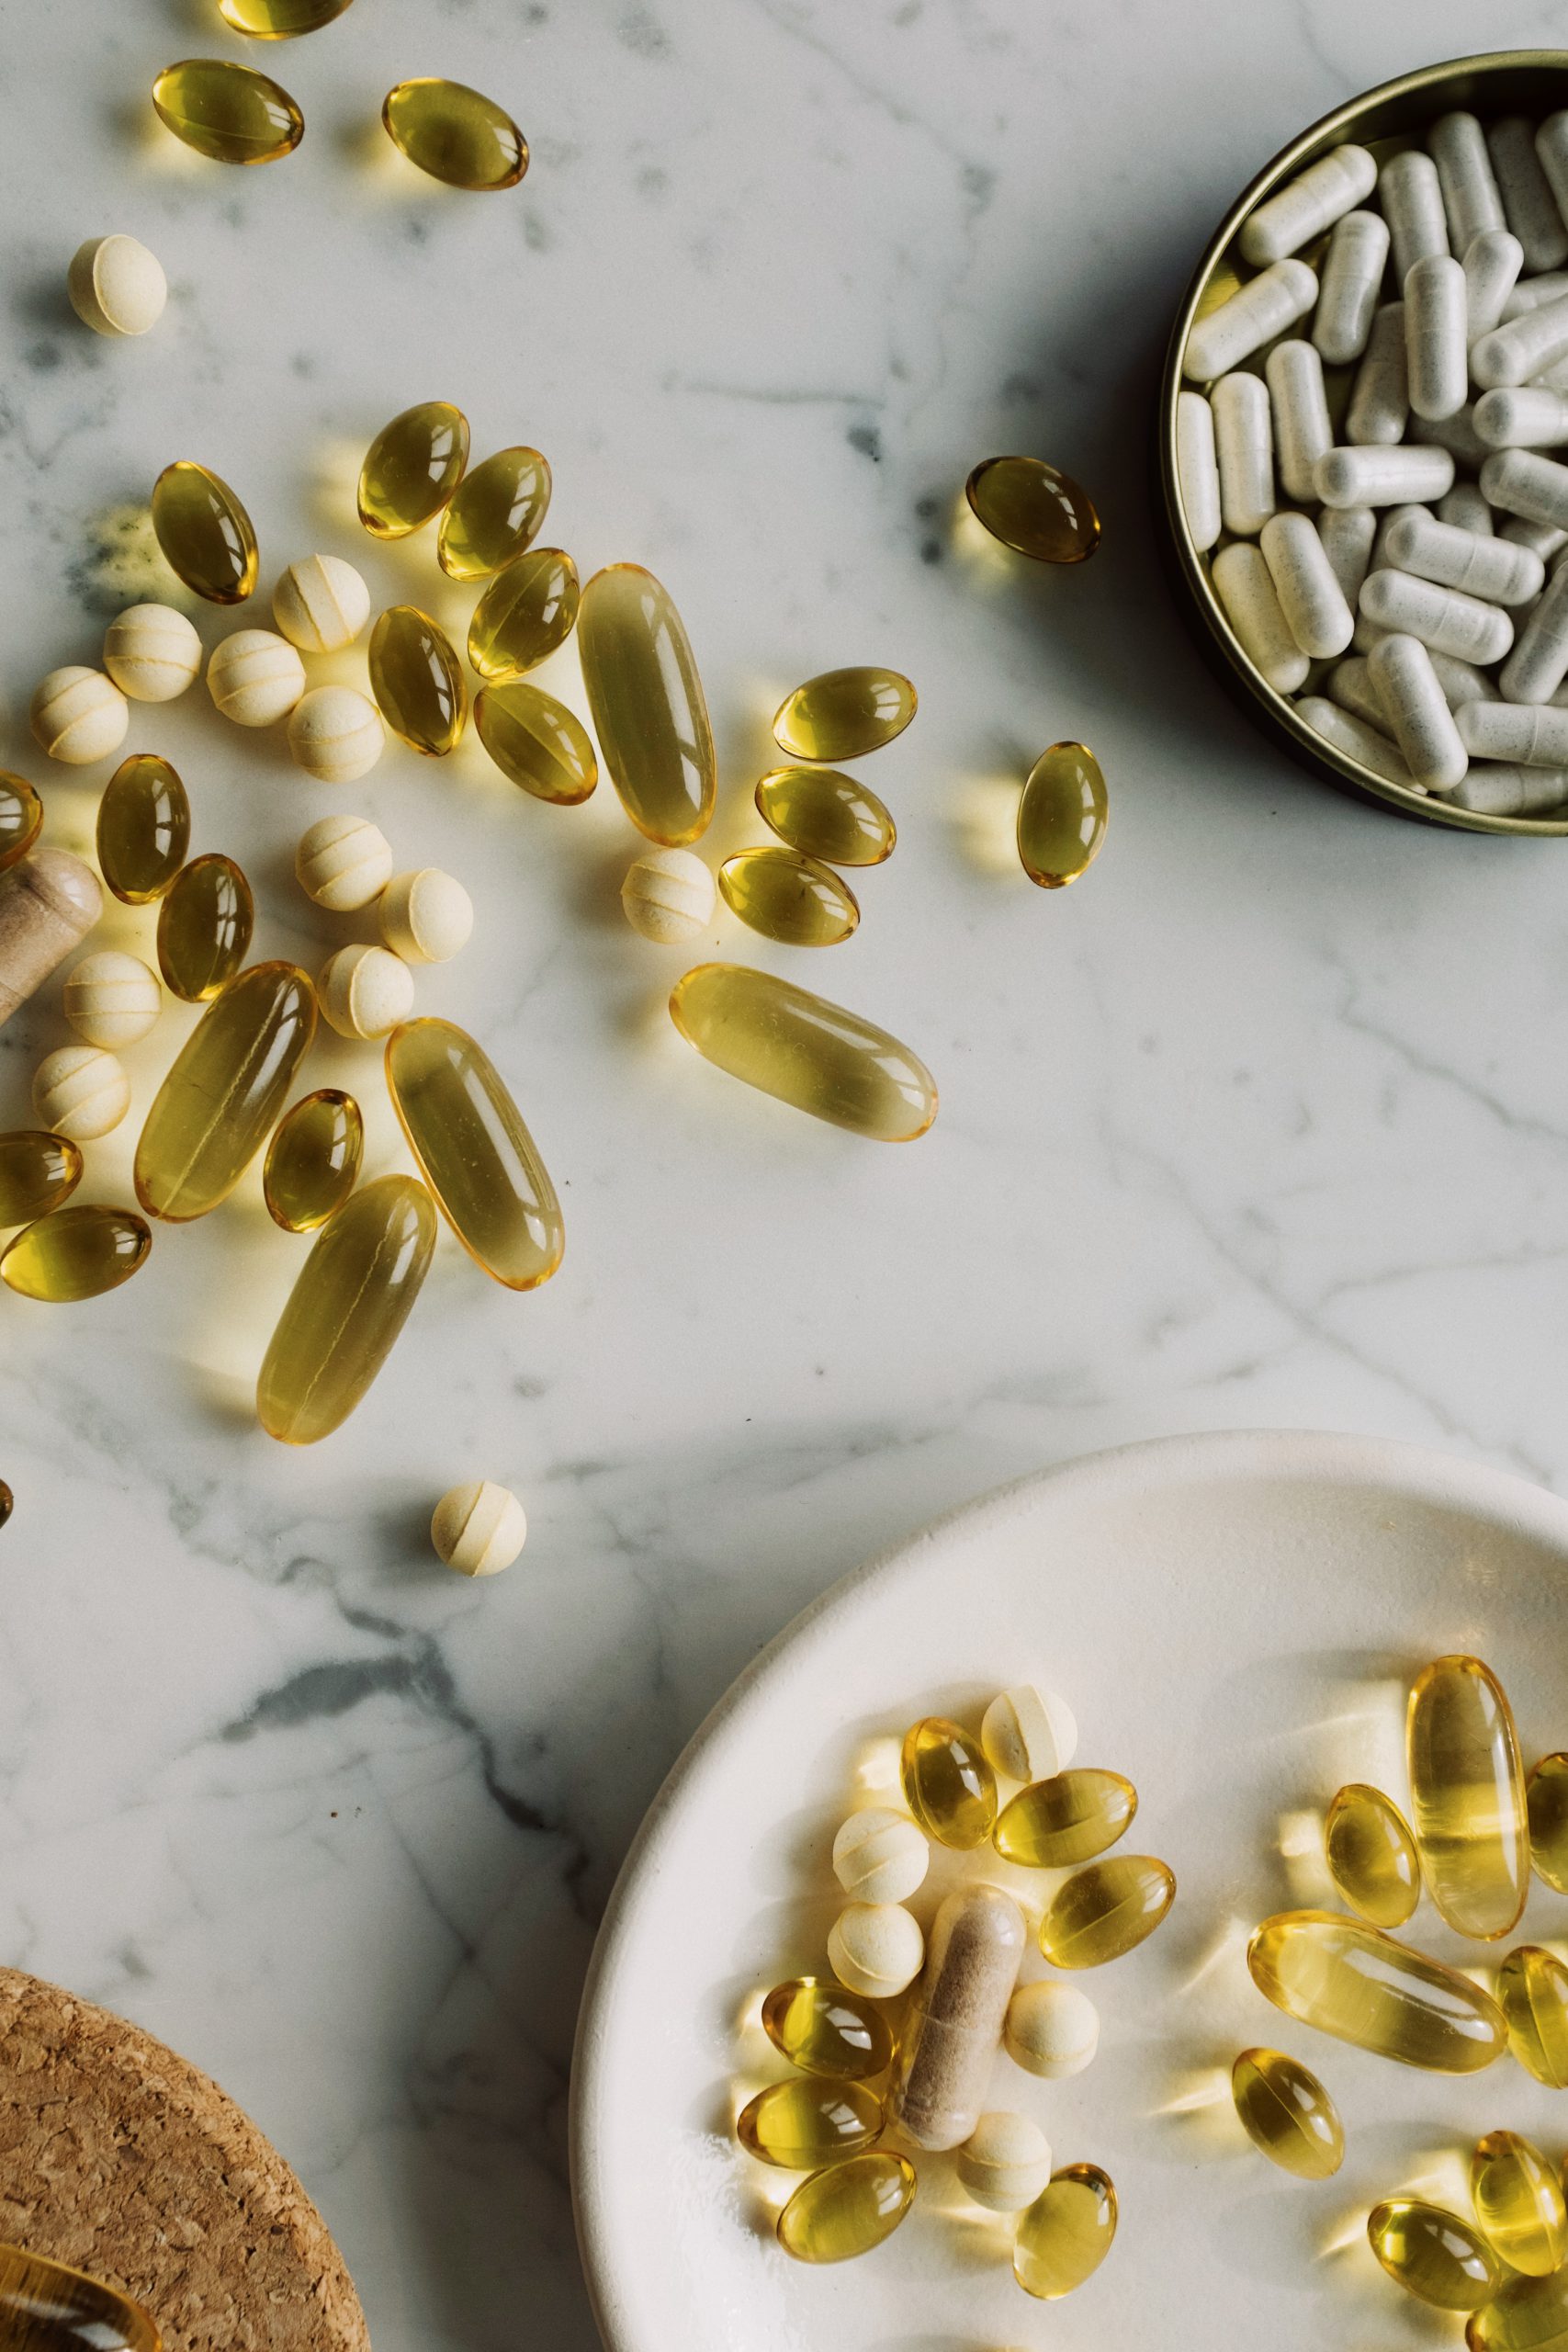 Whole Foods vs Supplements